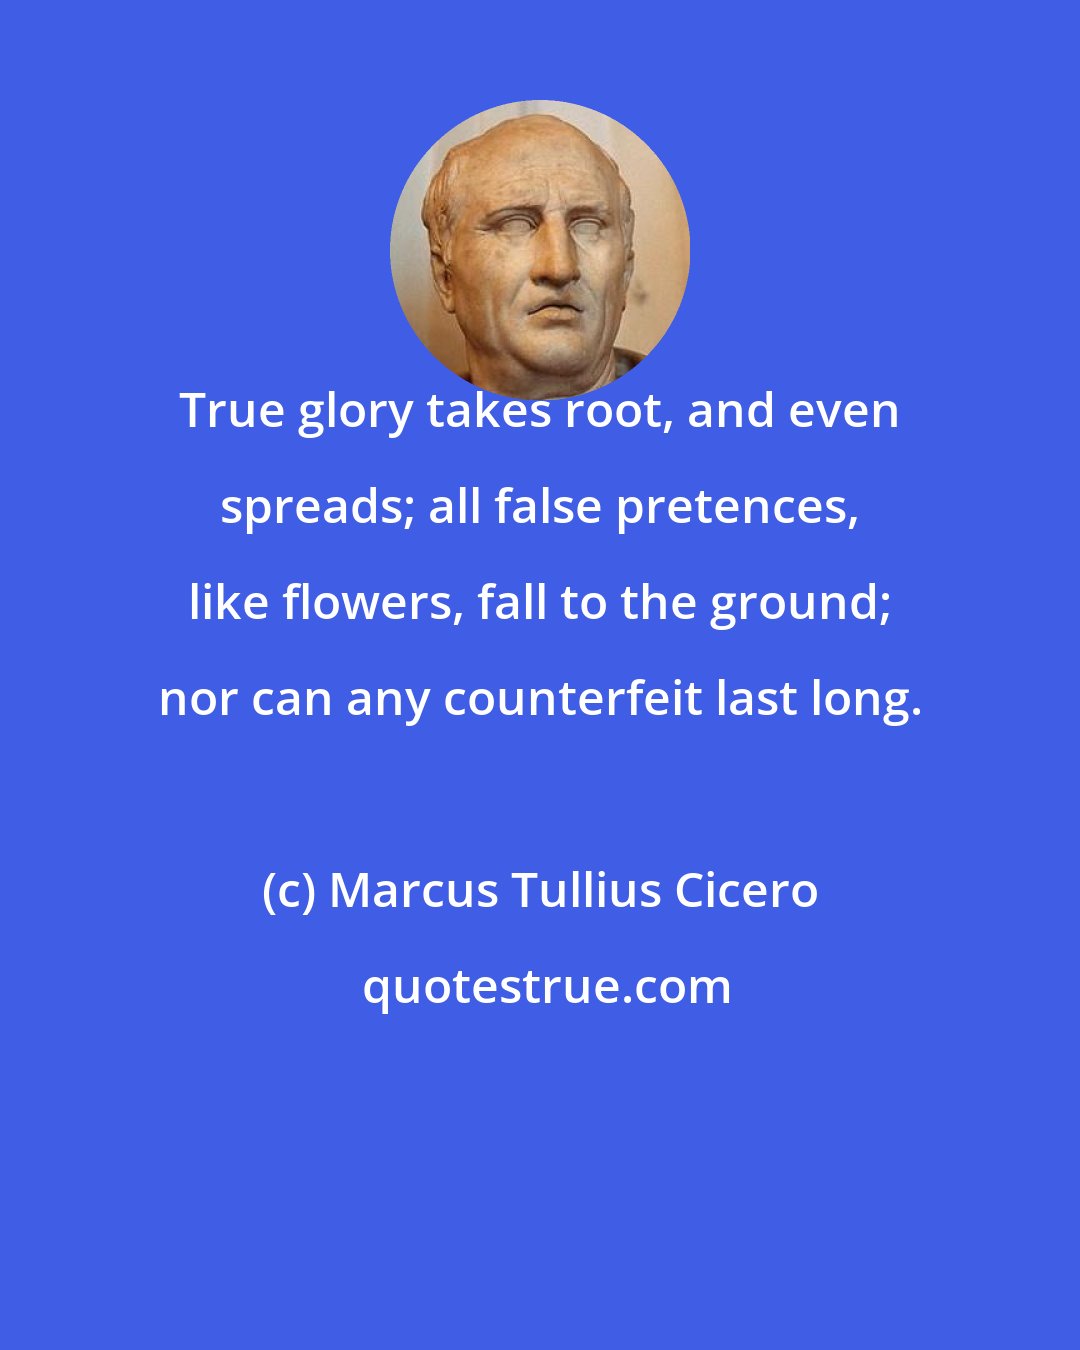 Marcus Tullius Cicero: True glory takes root, and even spreads; all false pretences, like flowers, fall to the ground; nor can any counterfeit last long.